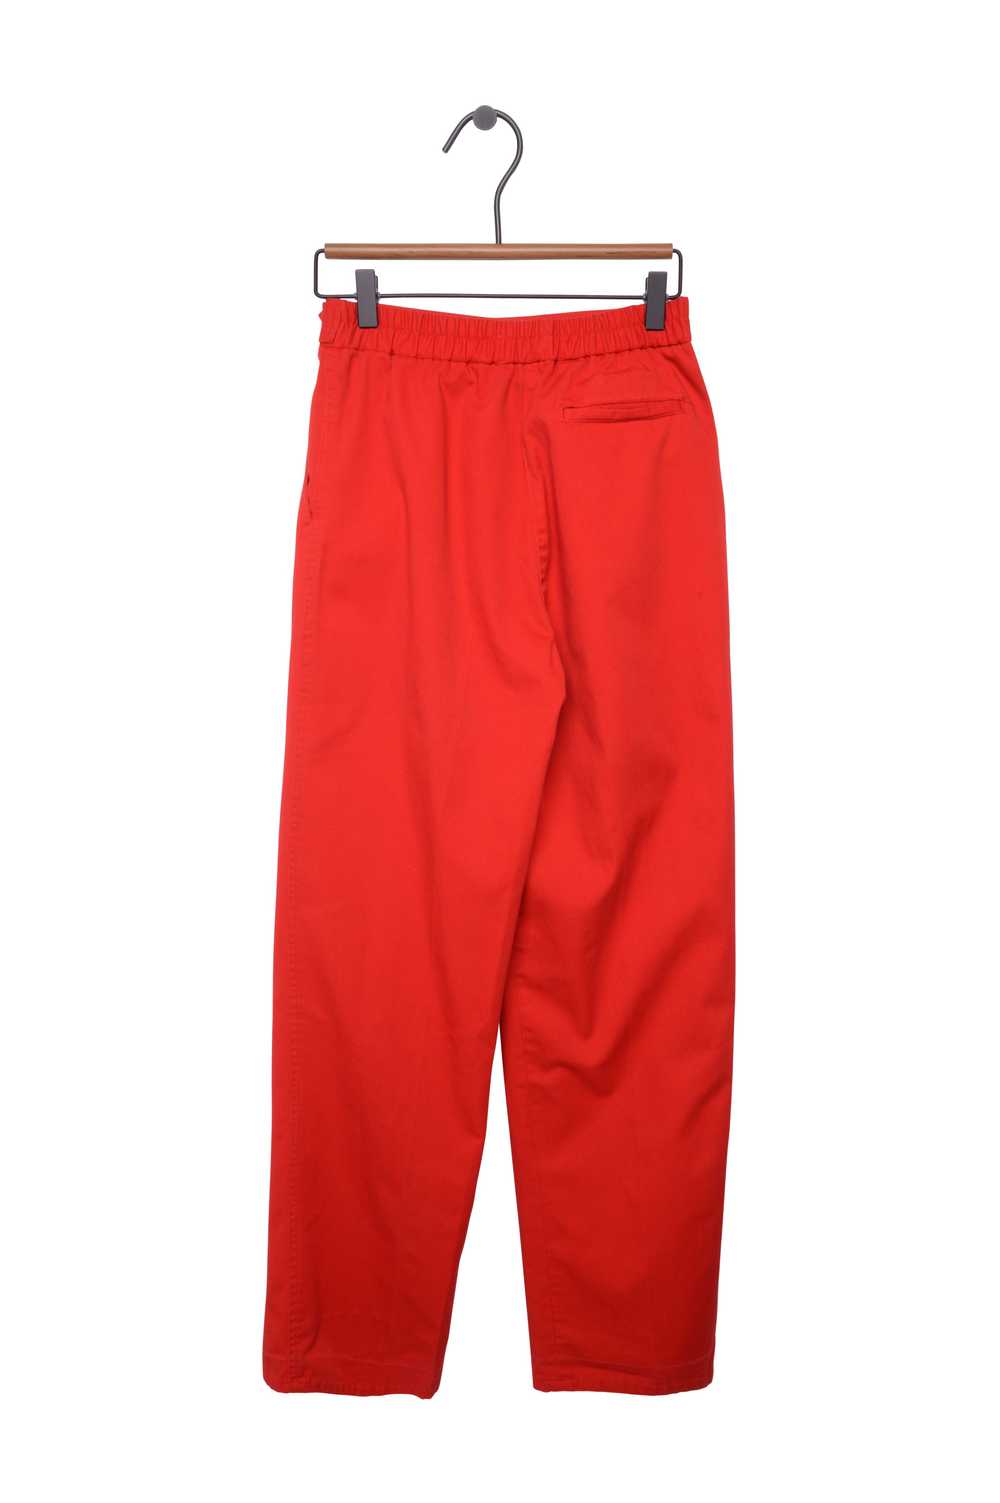 Cherry Red Trousers - image 3